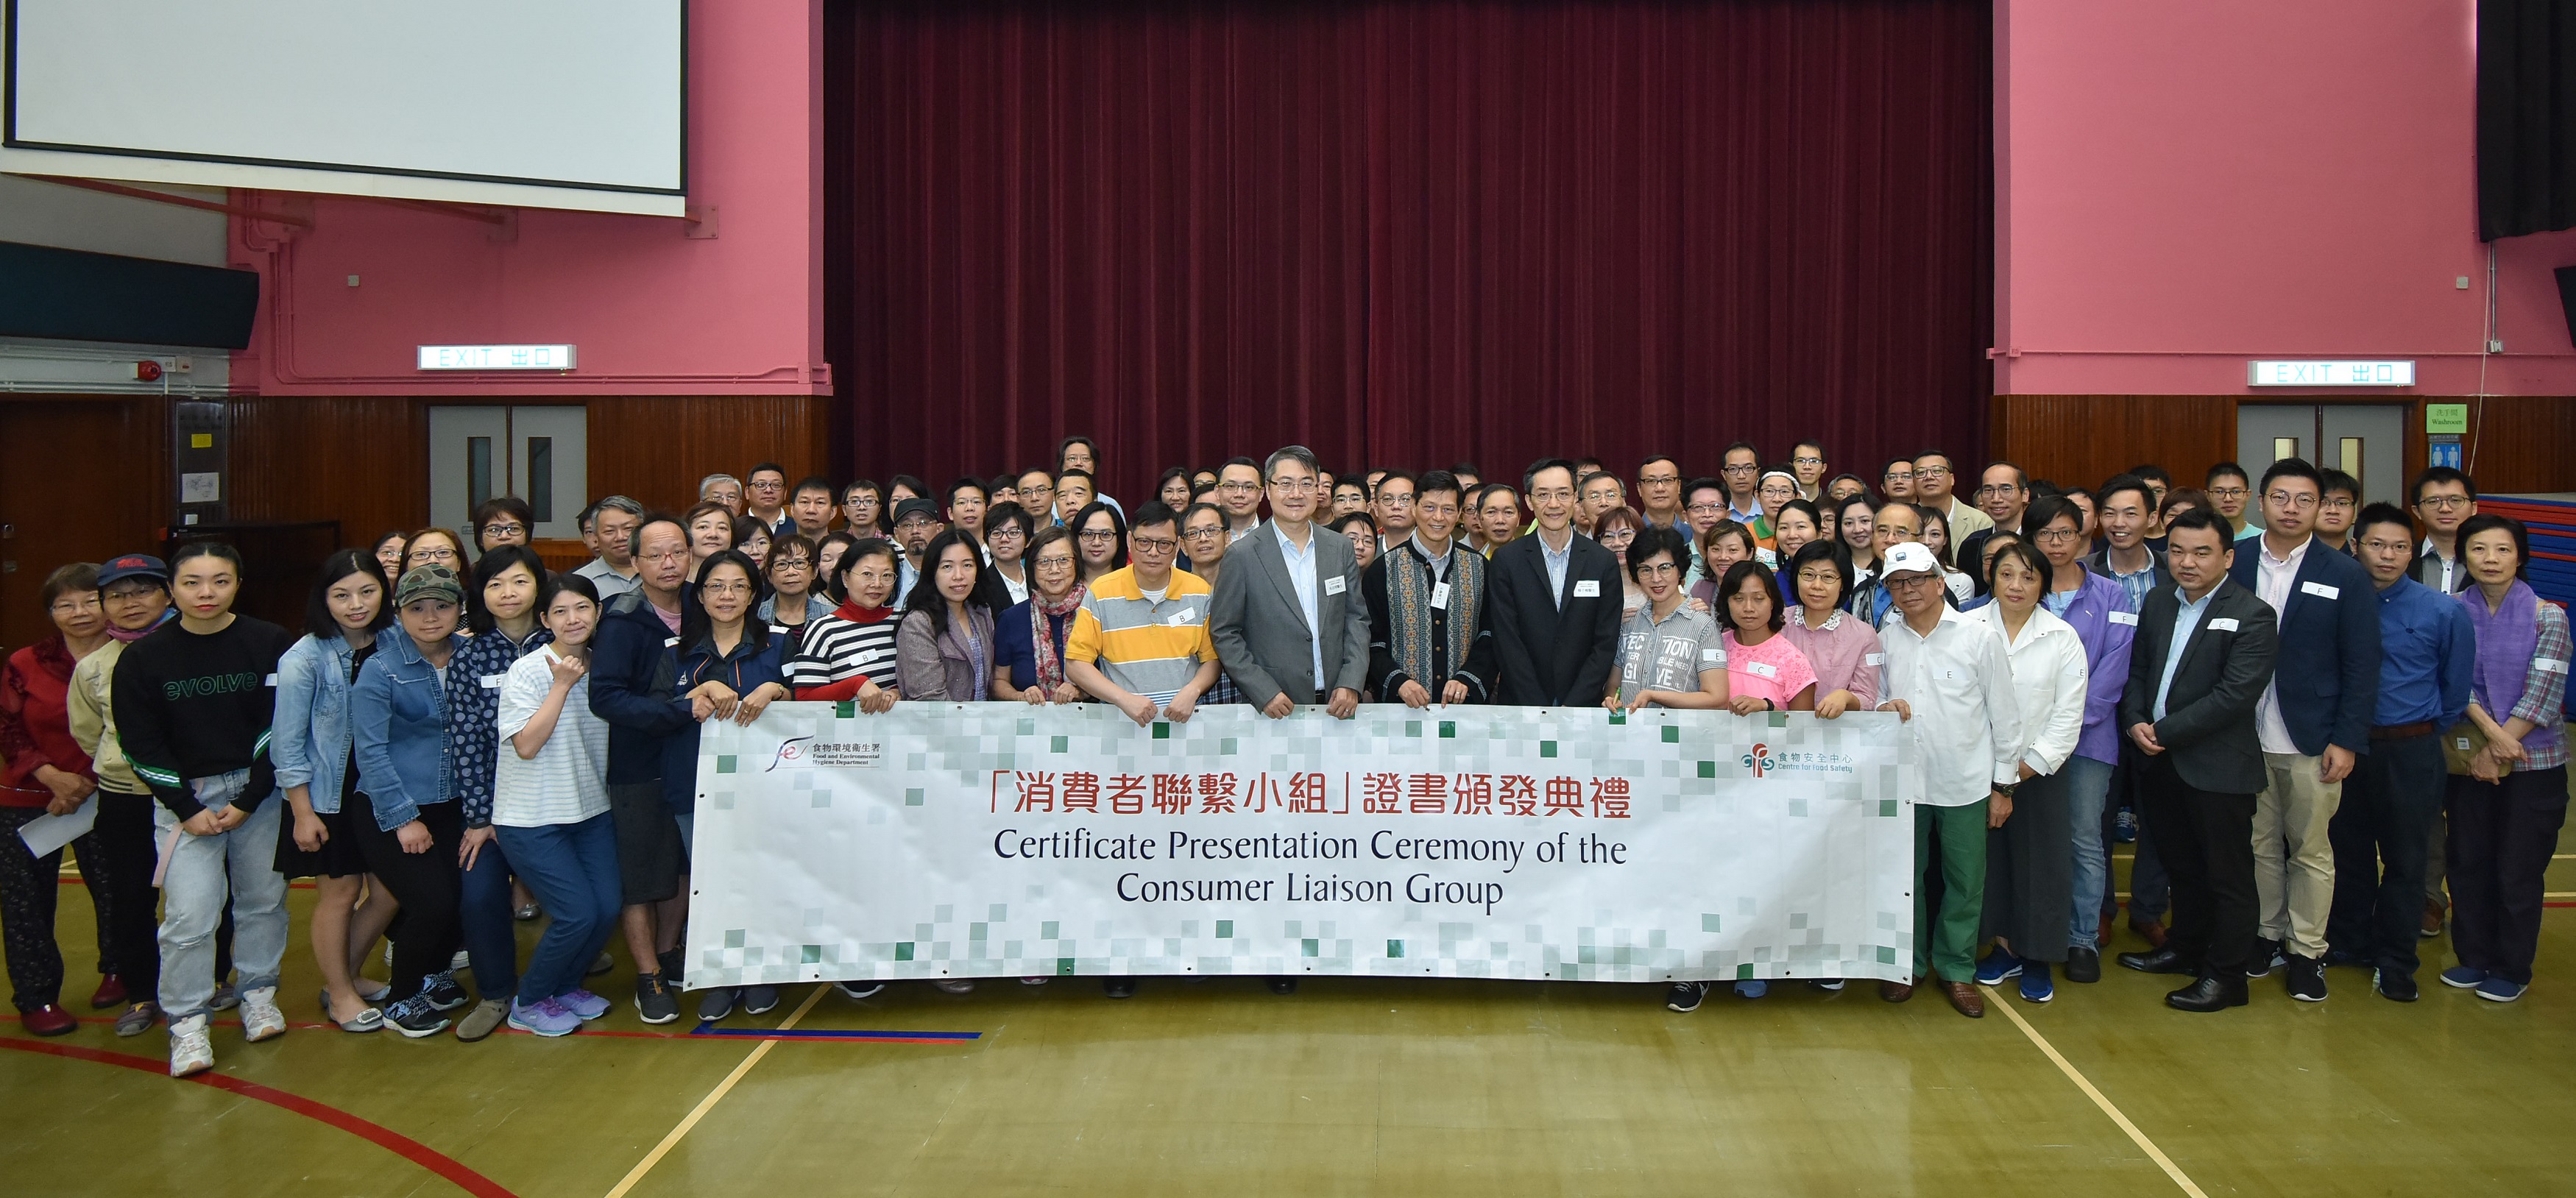 Dr. YY HO, Dr Samuel YEUNG and Dr Henry NG take group photo with CLG members